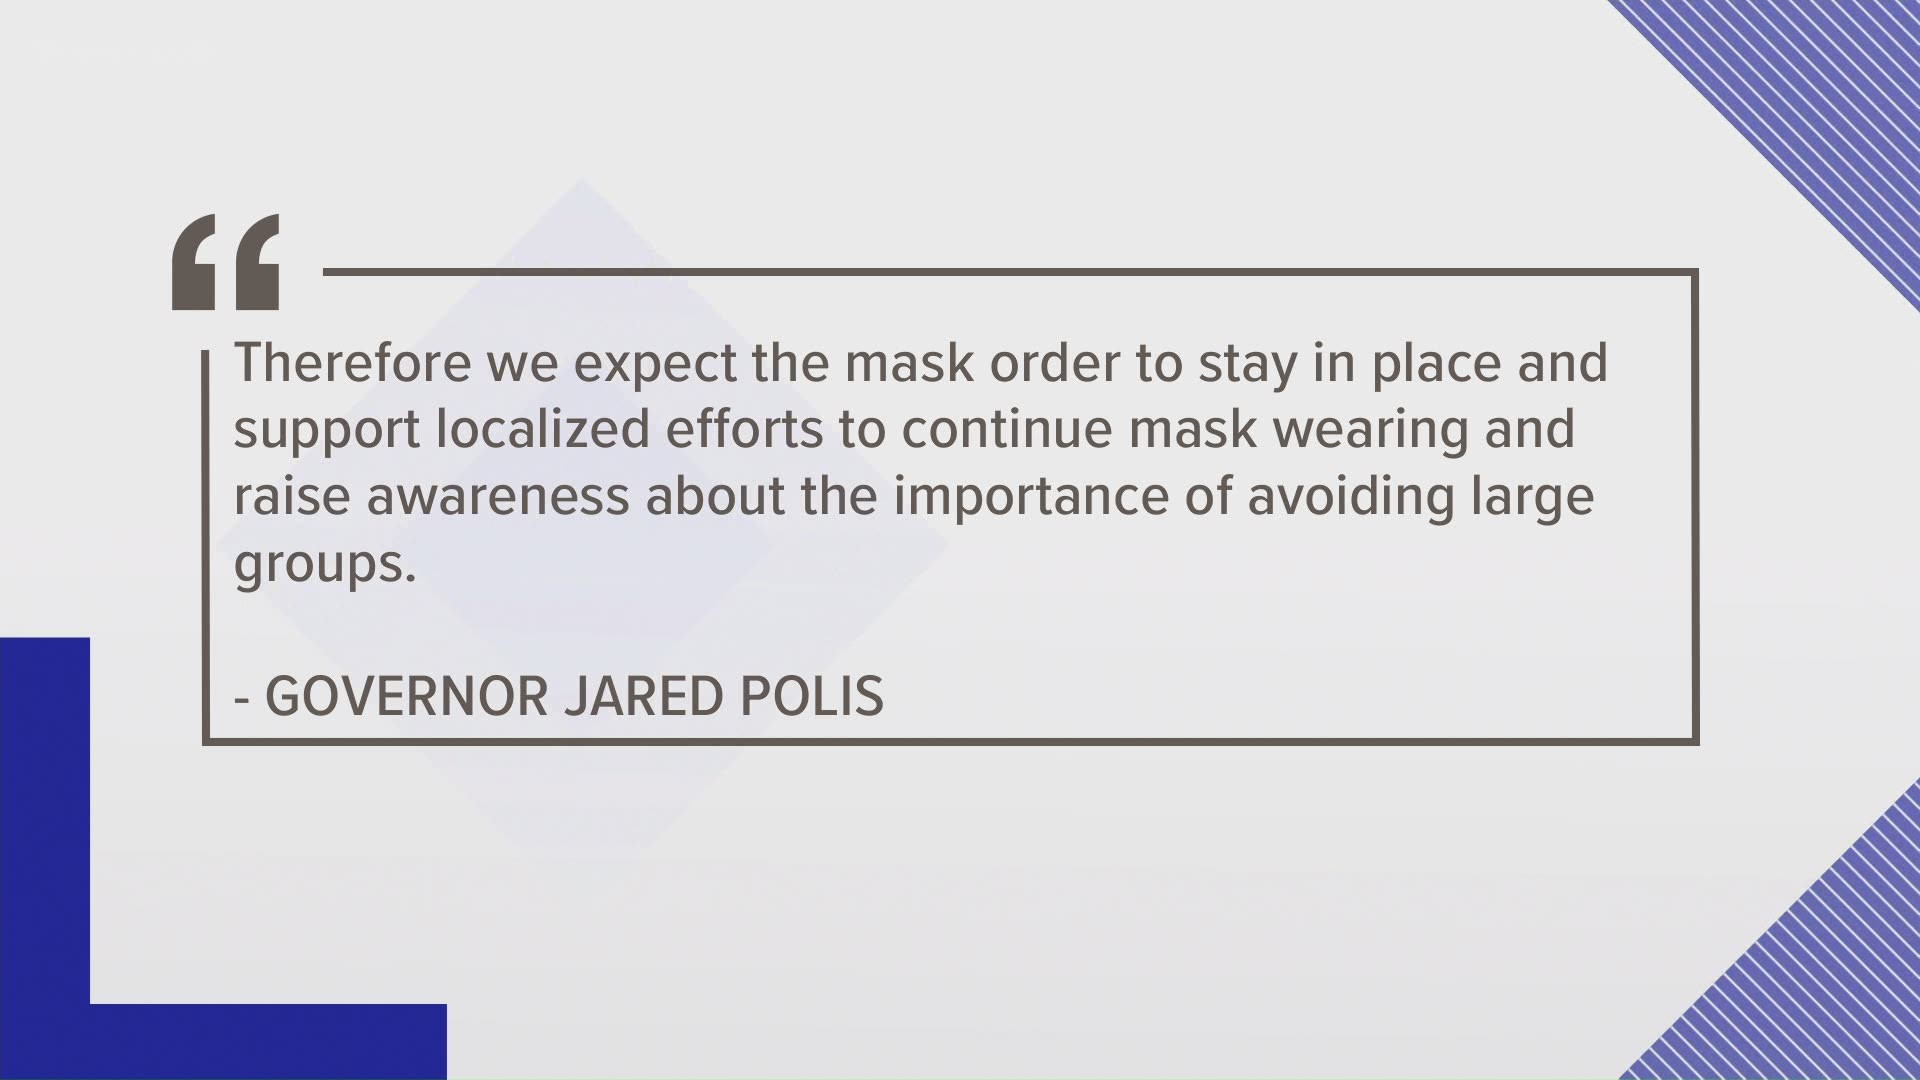 "We expect the mask order to stay in place and support localized efforts to continue mask-wearing ... " Polis said.